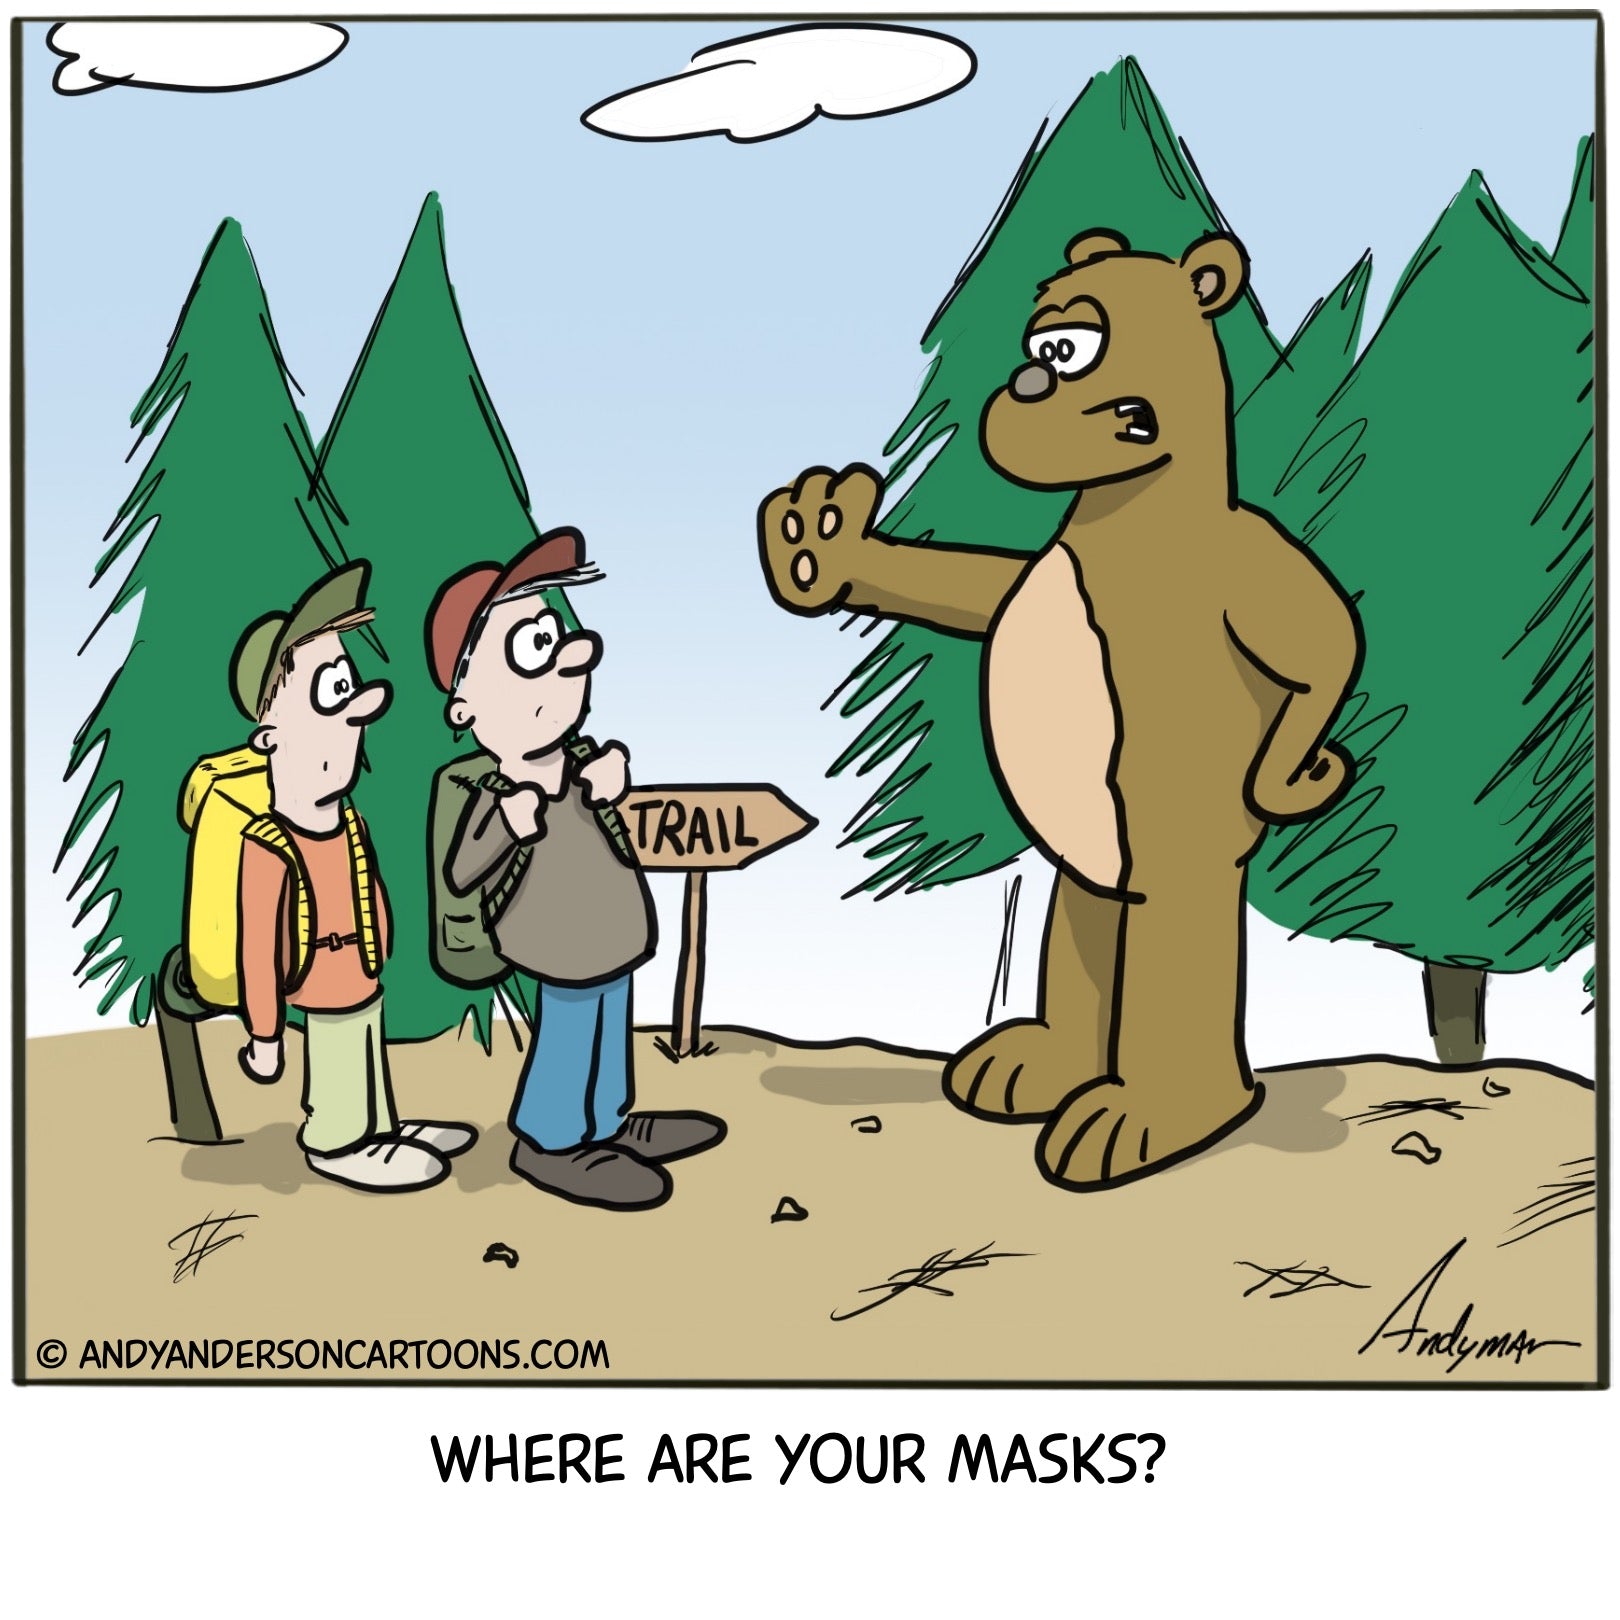 Cartoon about hikers being denied access to the outdoors because of no masks